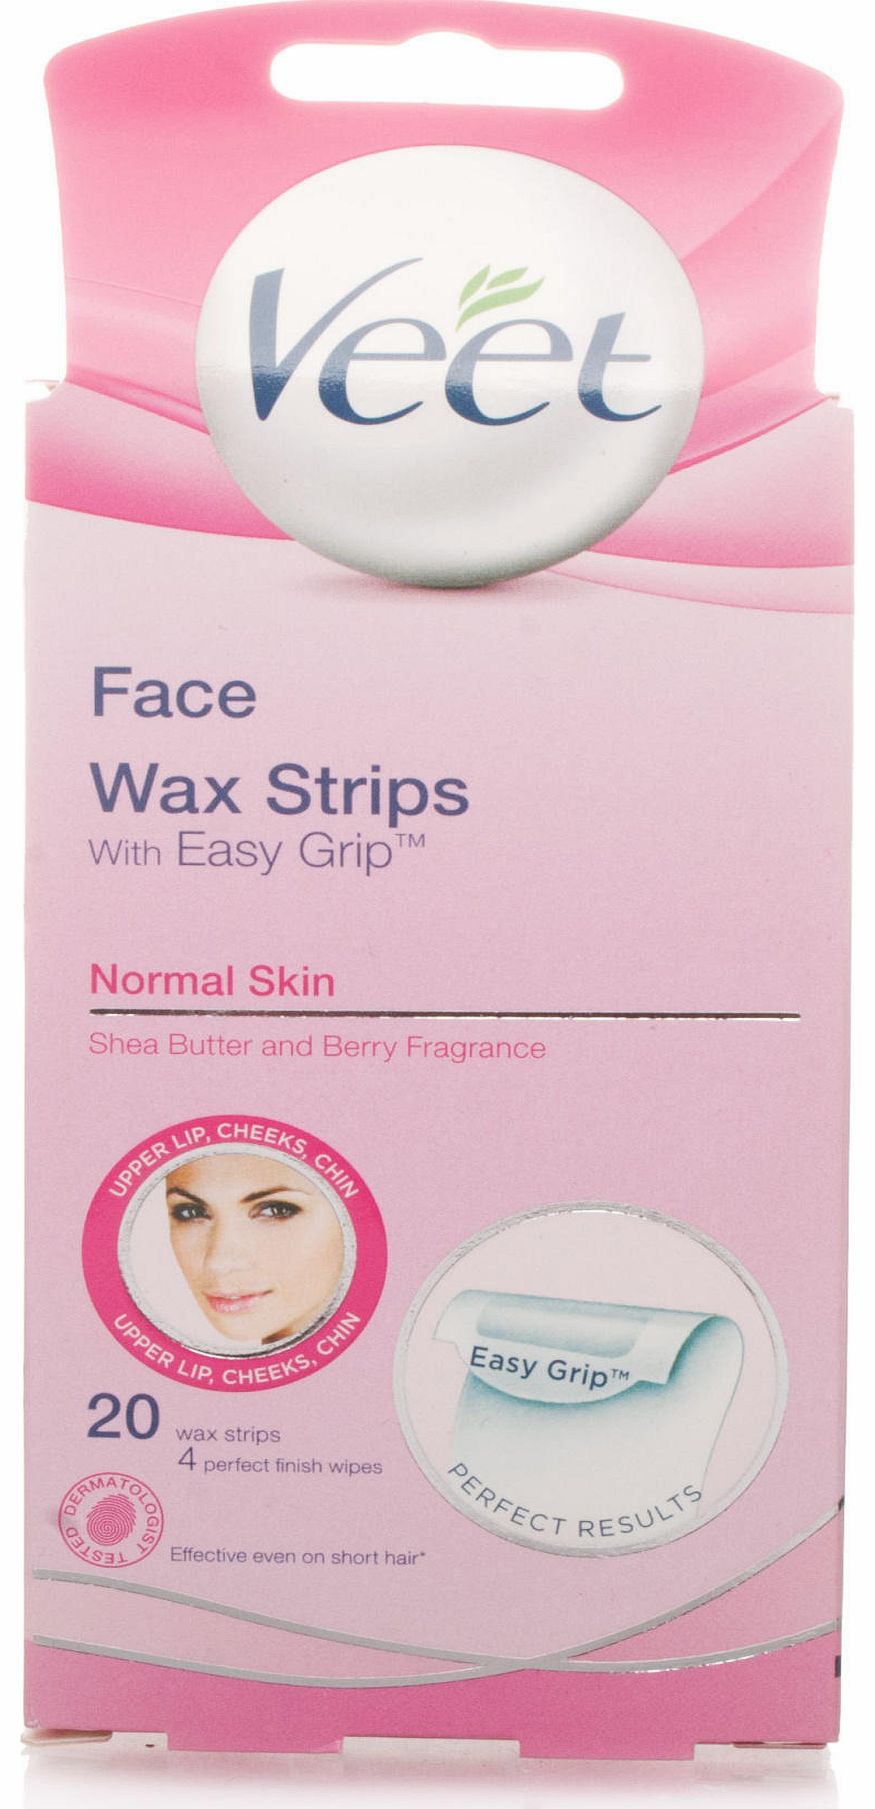 Ready to Use Wax Strips for Face for Normal